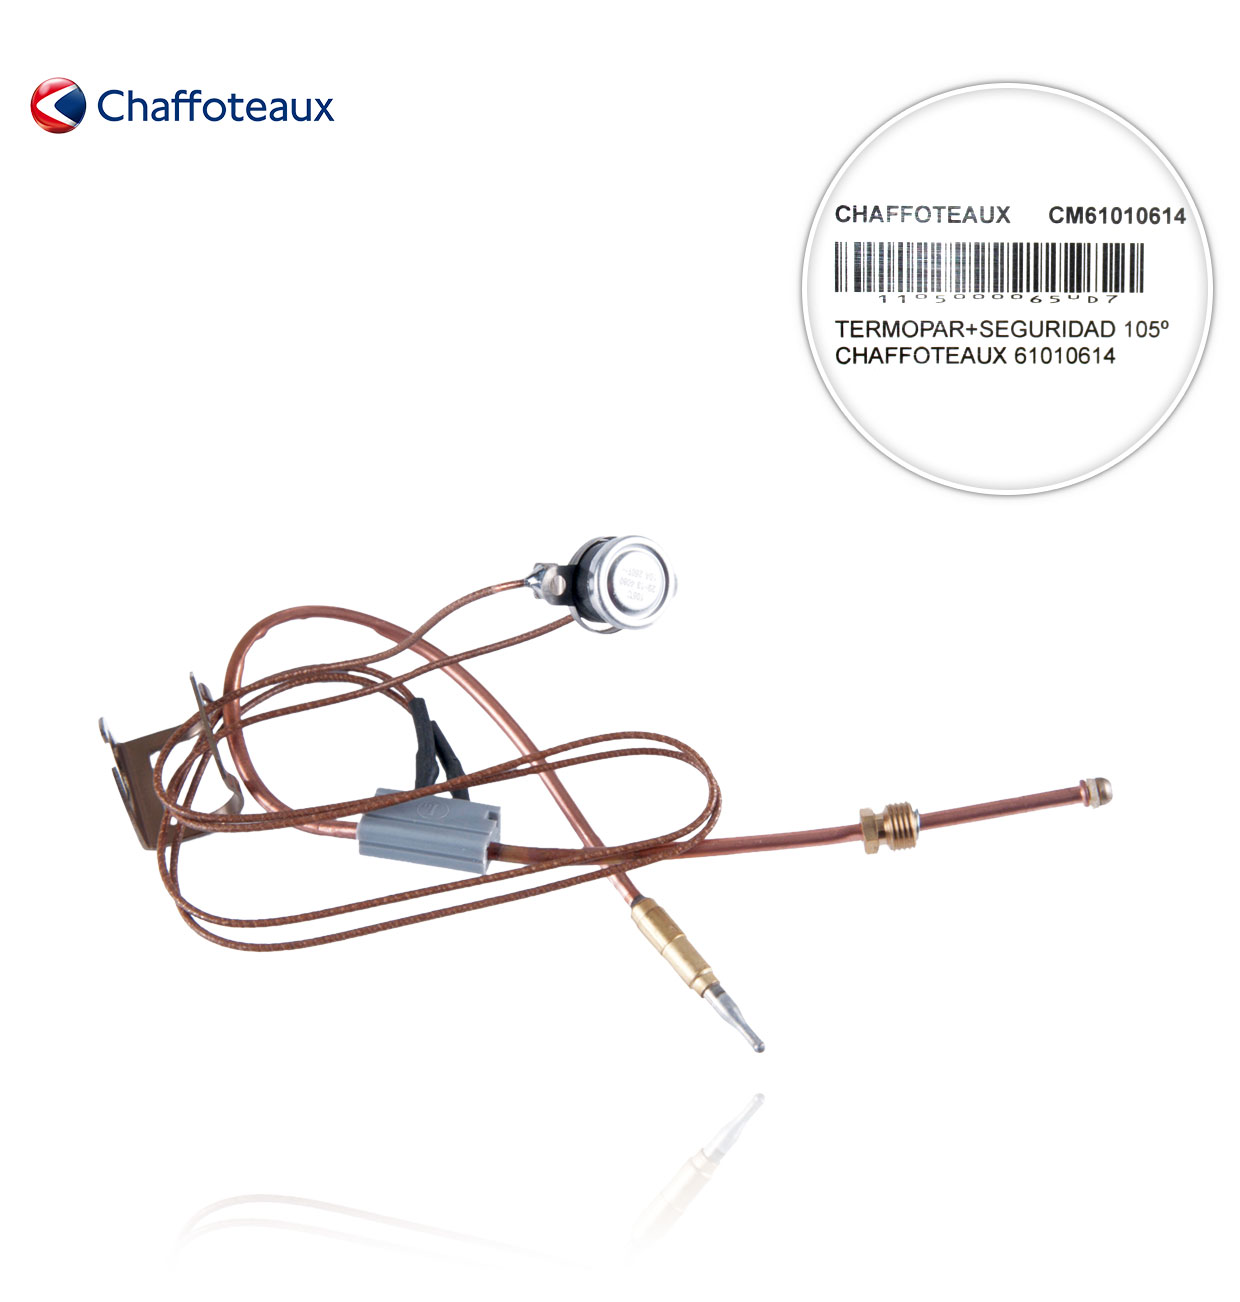 CHAFFOTEAUX 61010614 105º SAFETY+THERMOCOUPLE